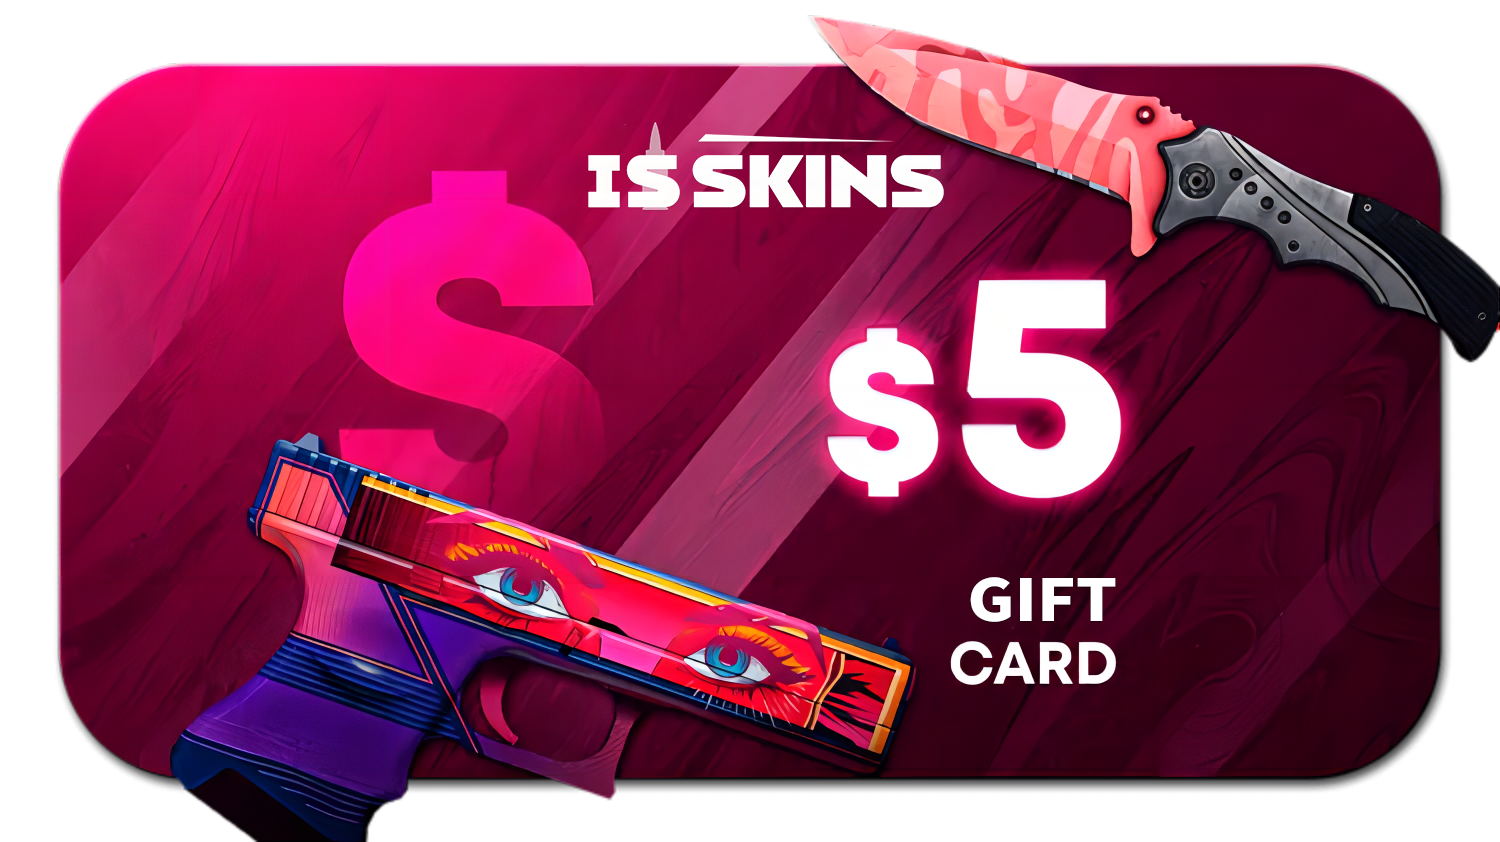 ISSKINS $5 Gift Card 5.29 $